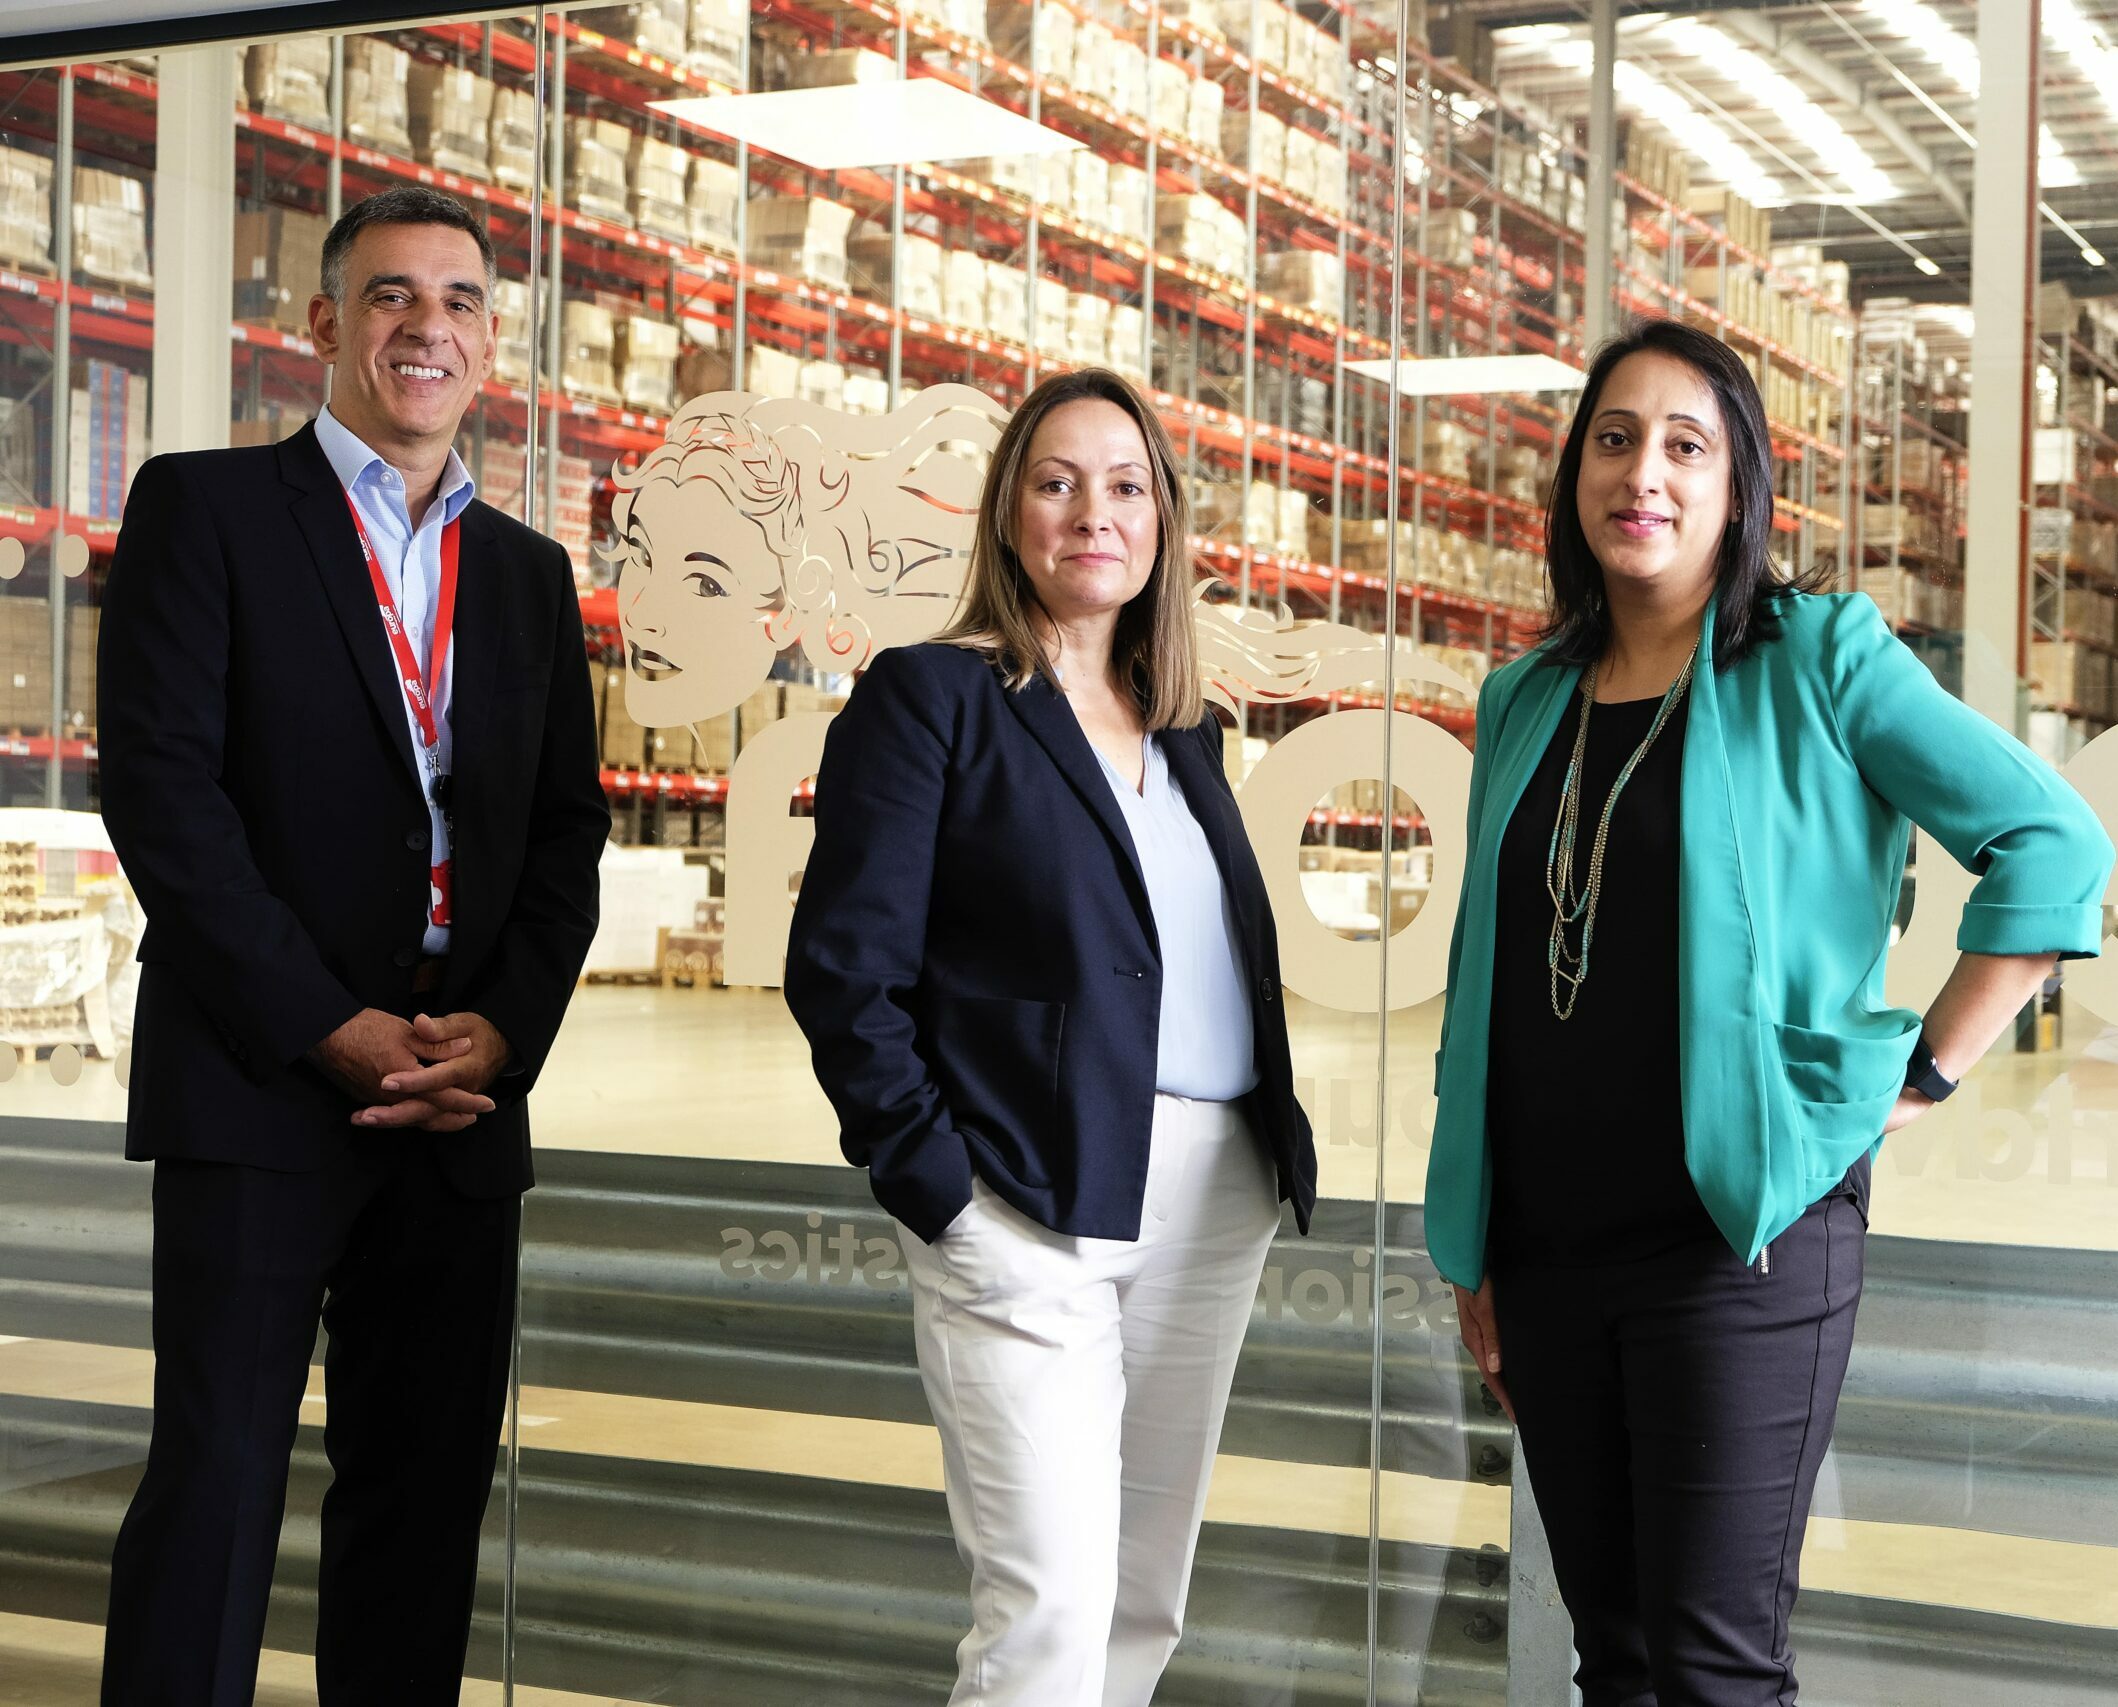 John, Sally and Sonal stand in front of a glass wall inside a Europa Warehouse.